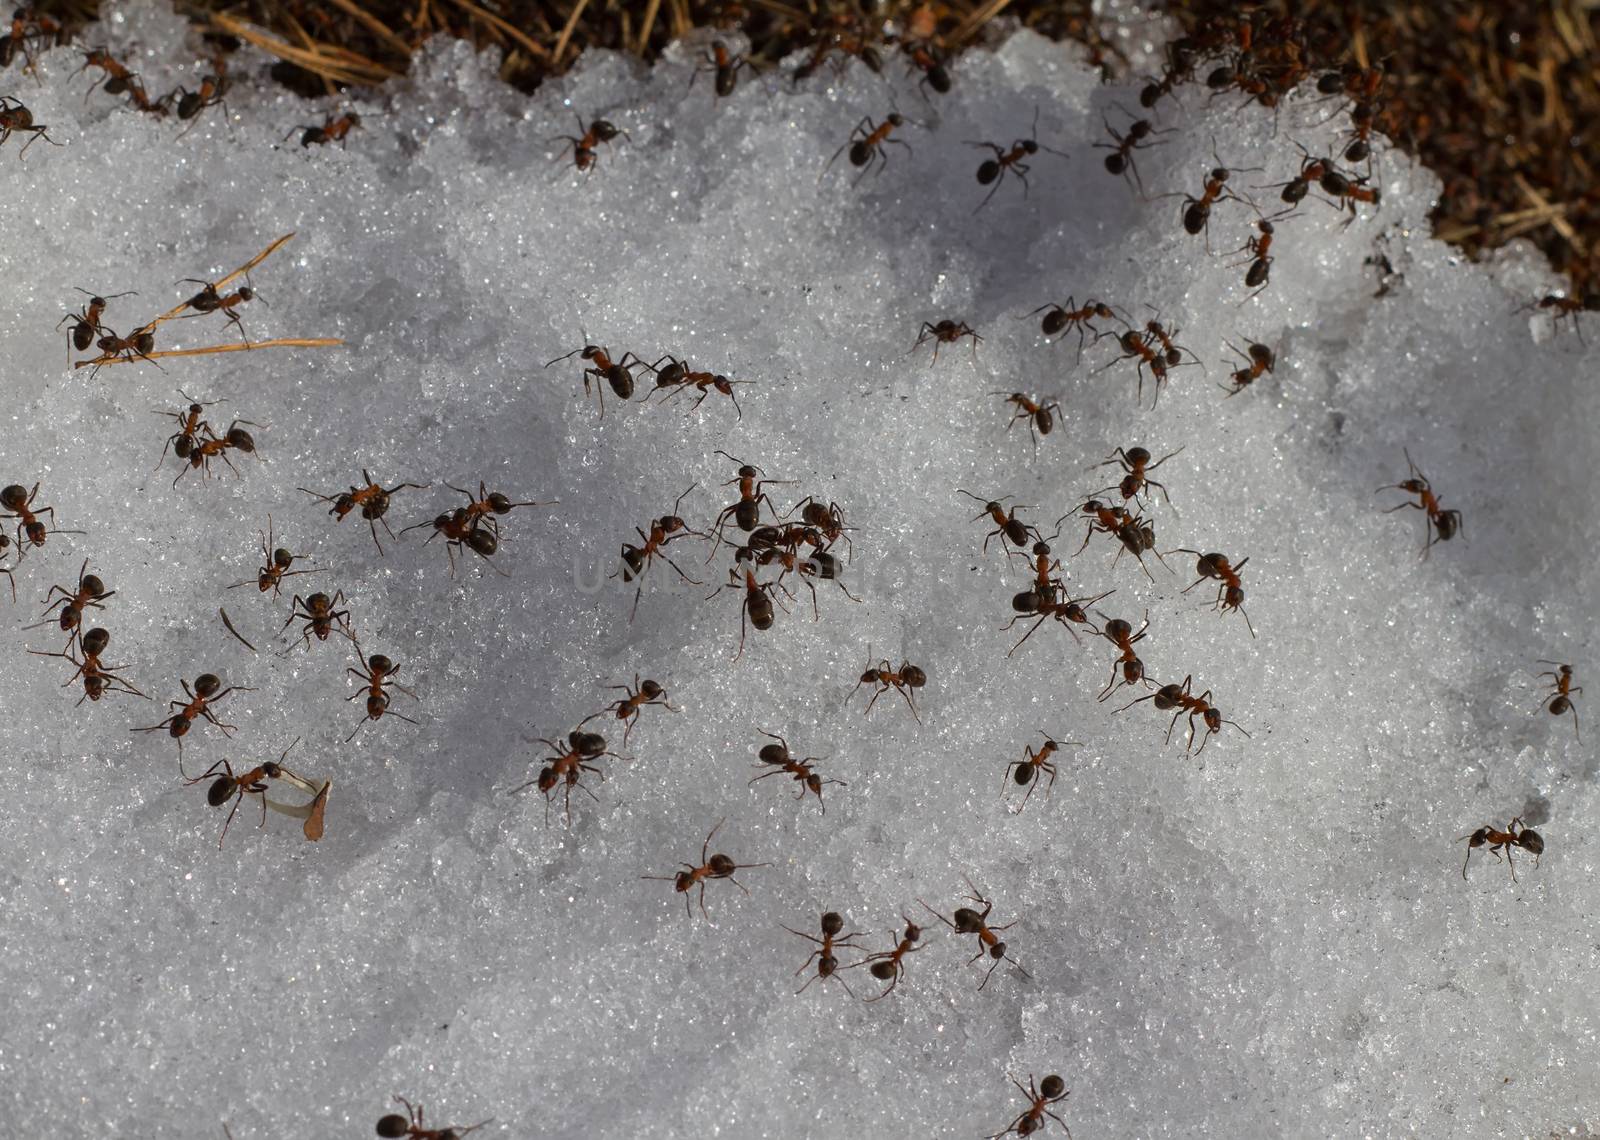 spring ants not the end on the melted snow